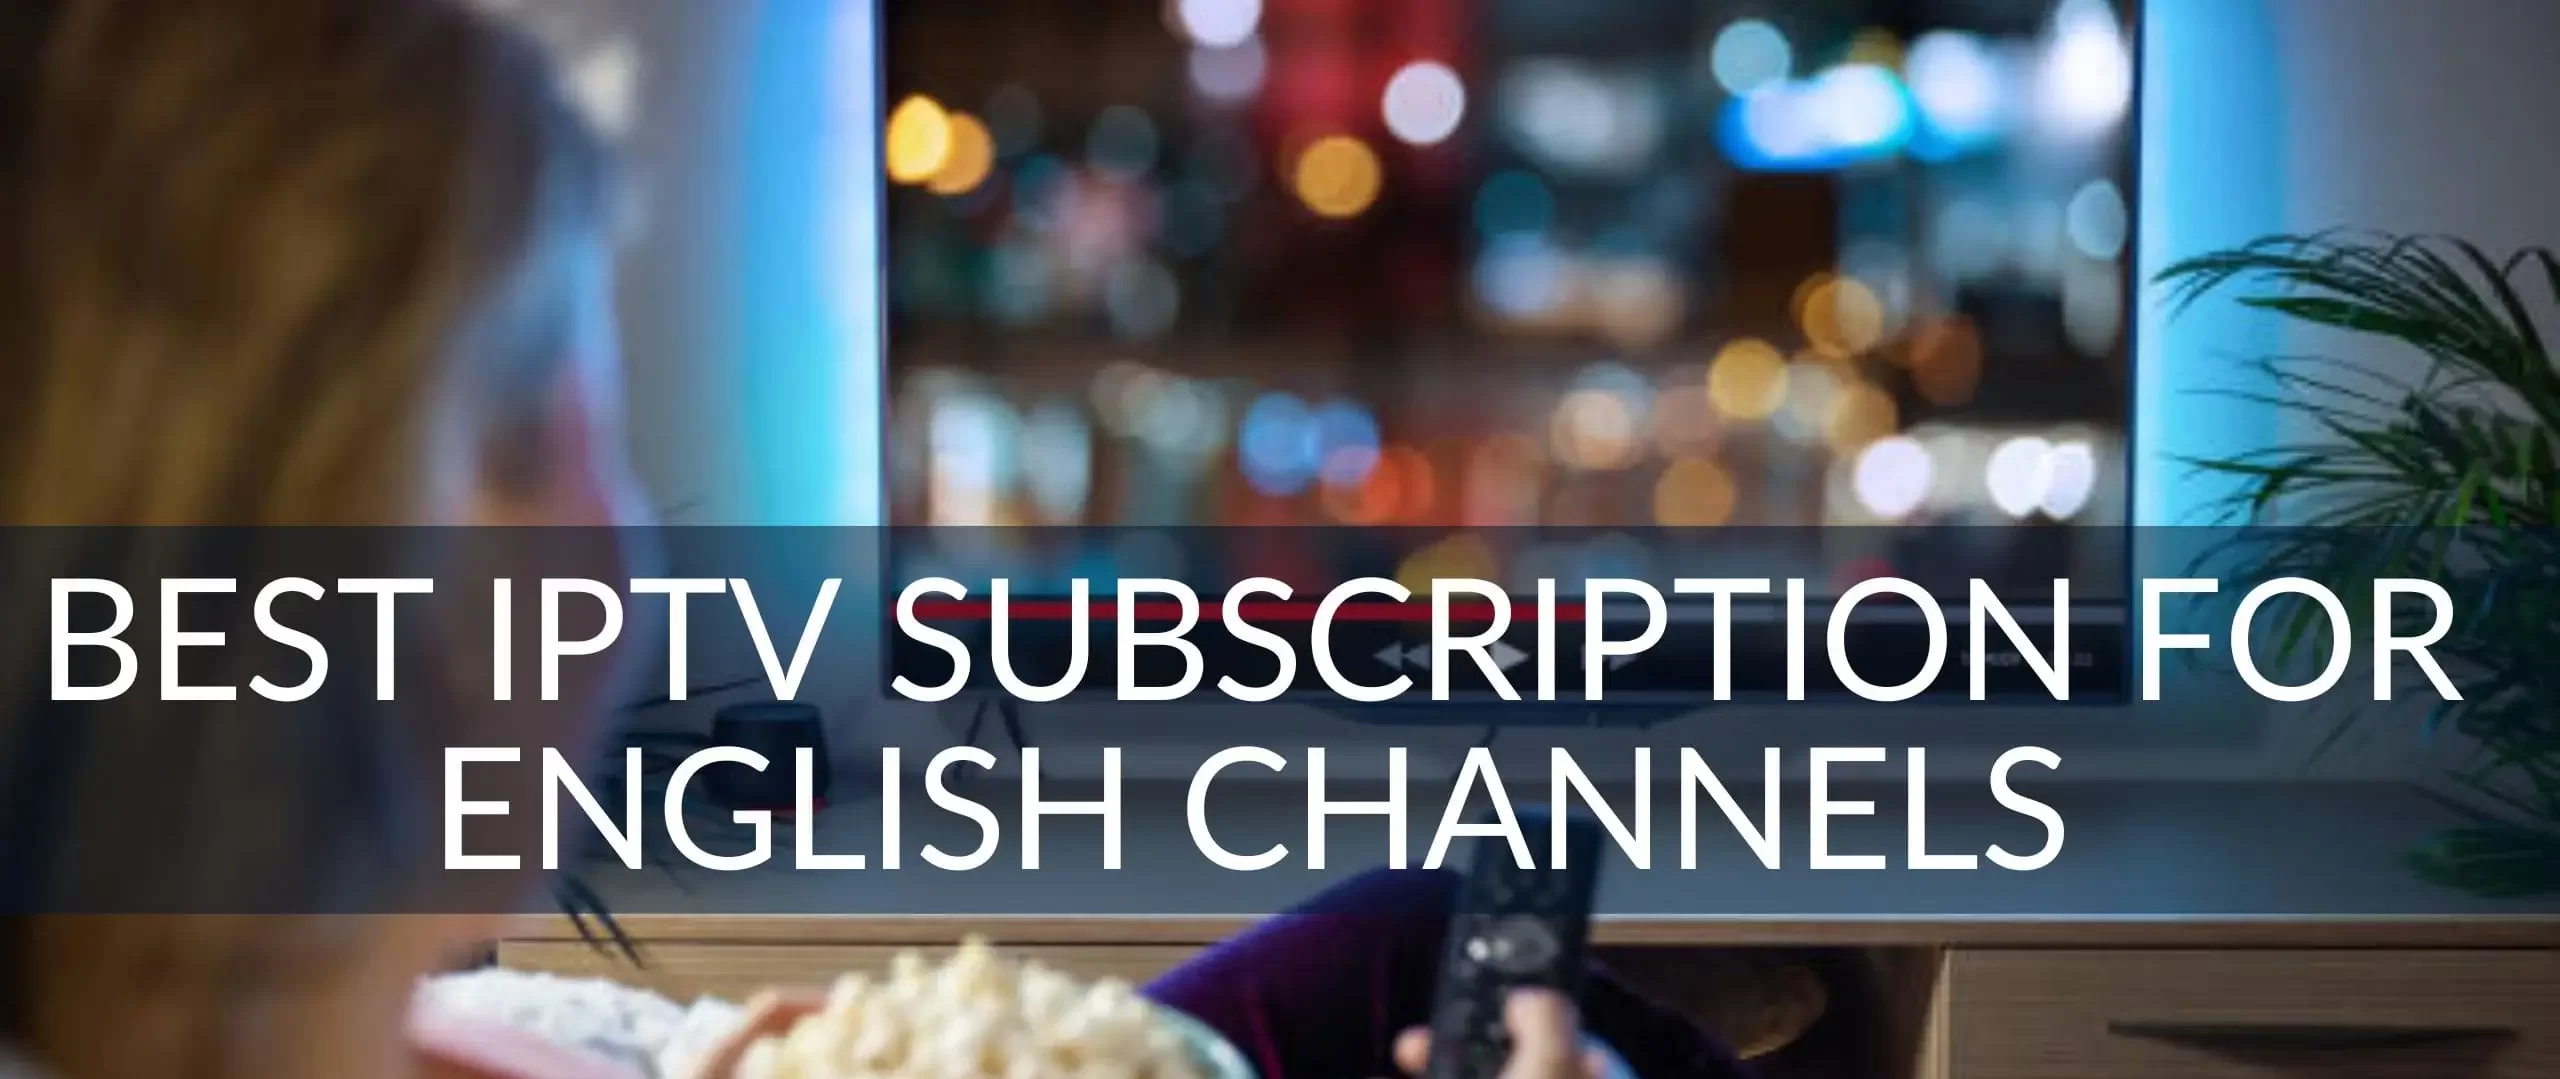 Best IPTV subscription for English Channels